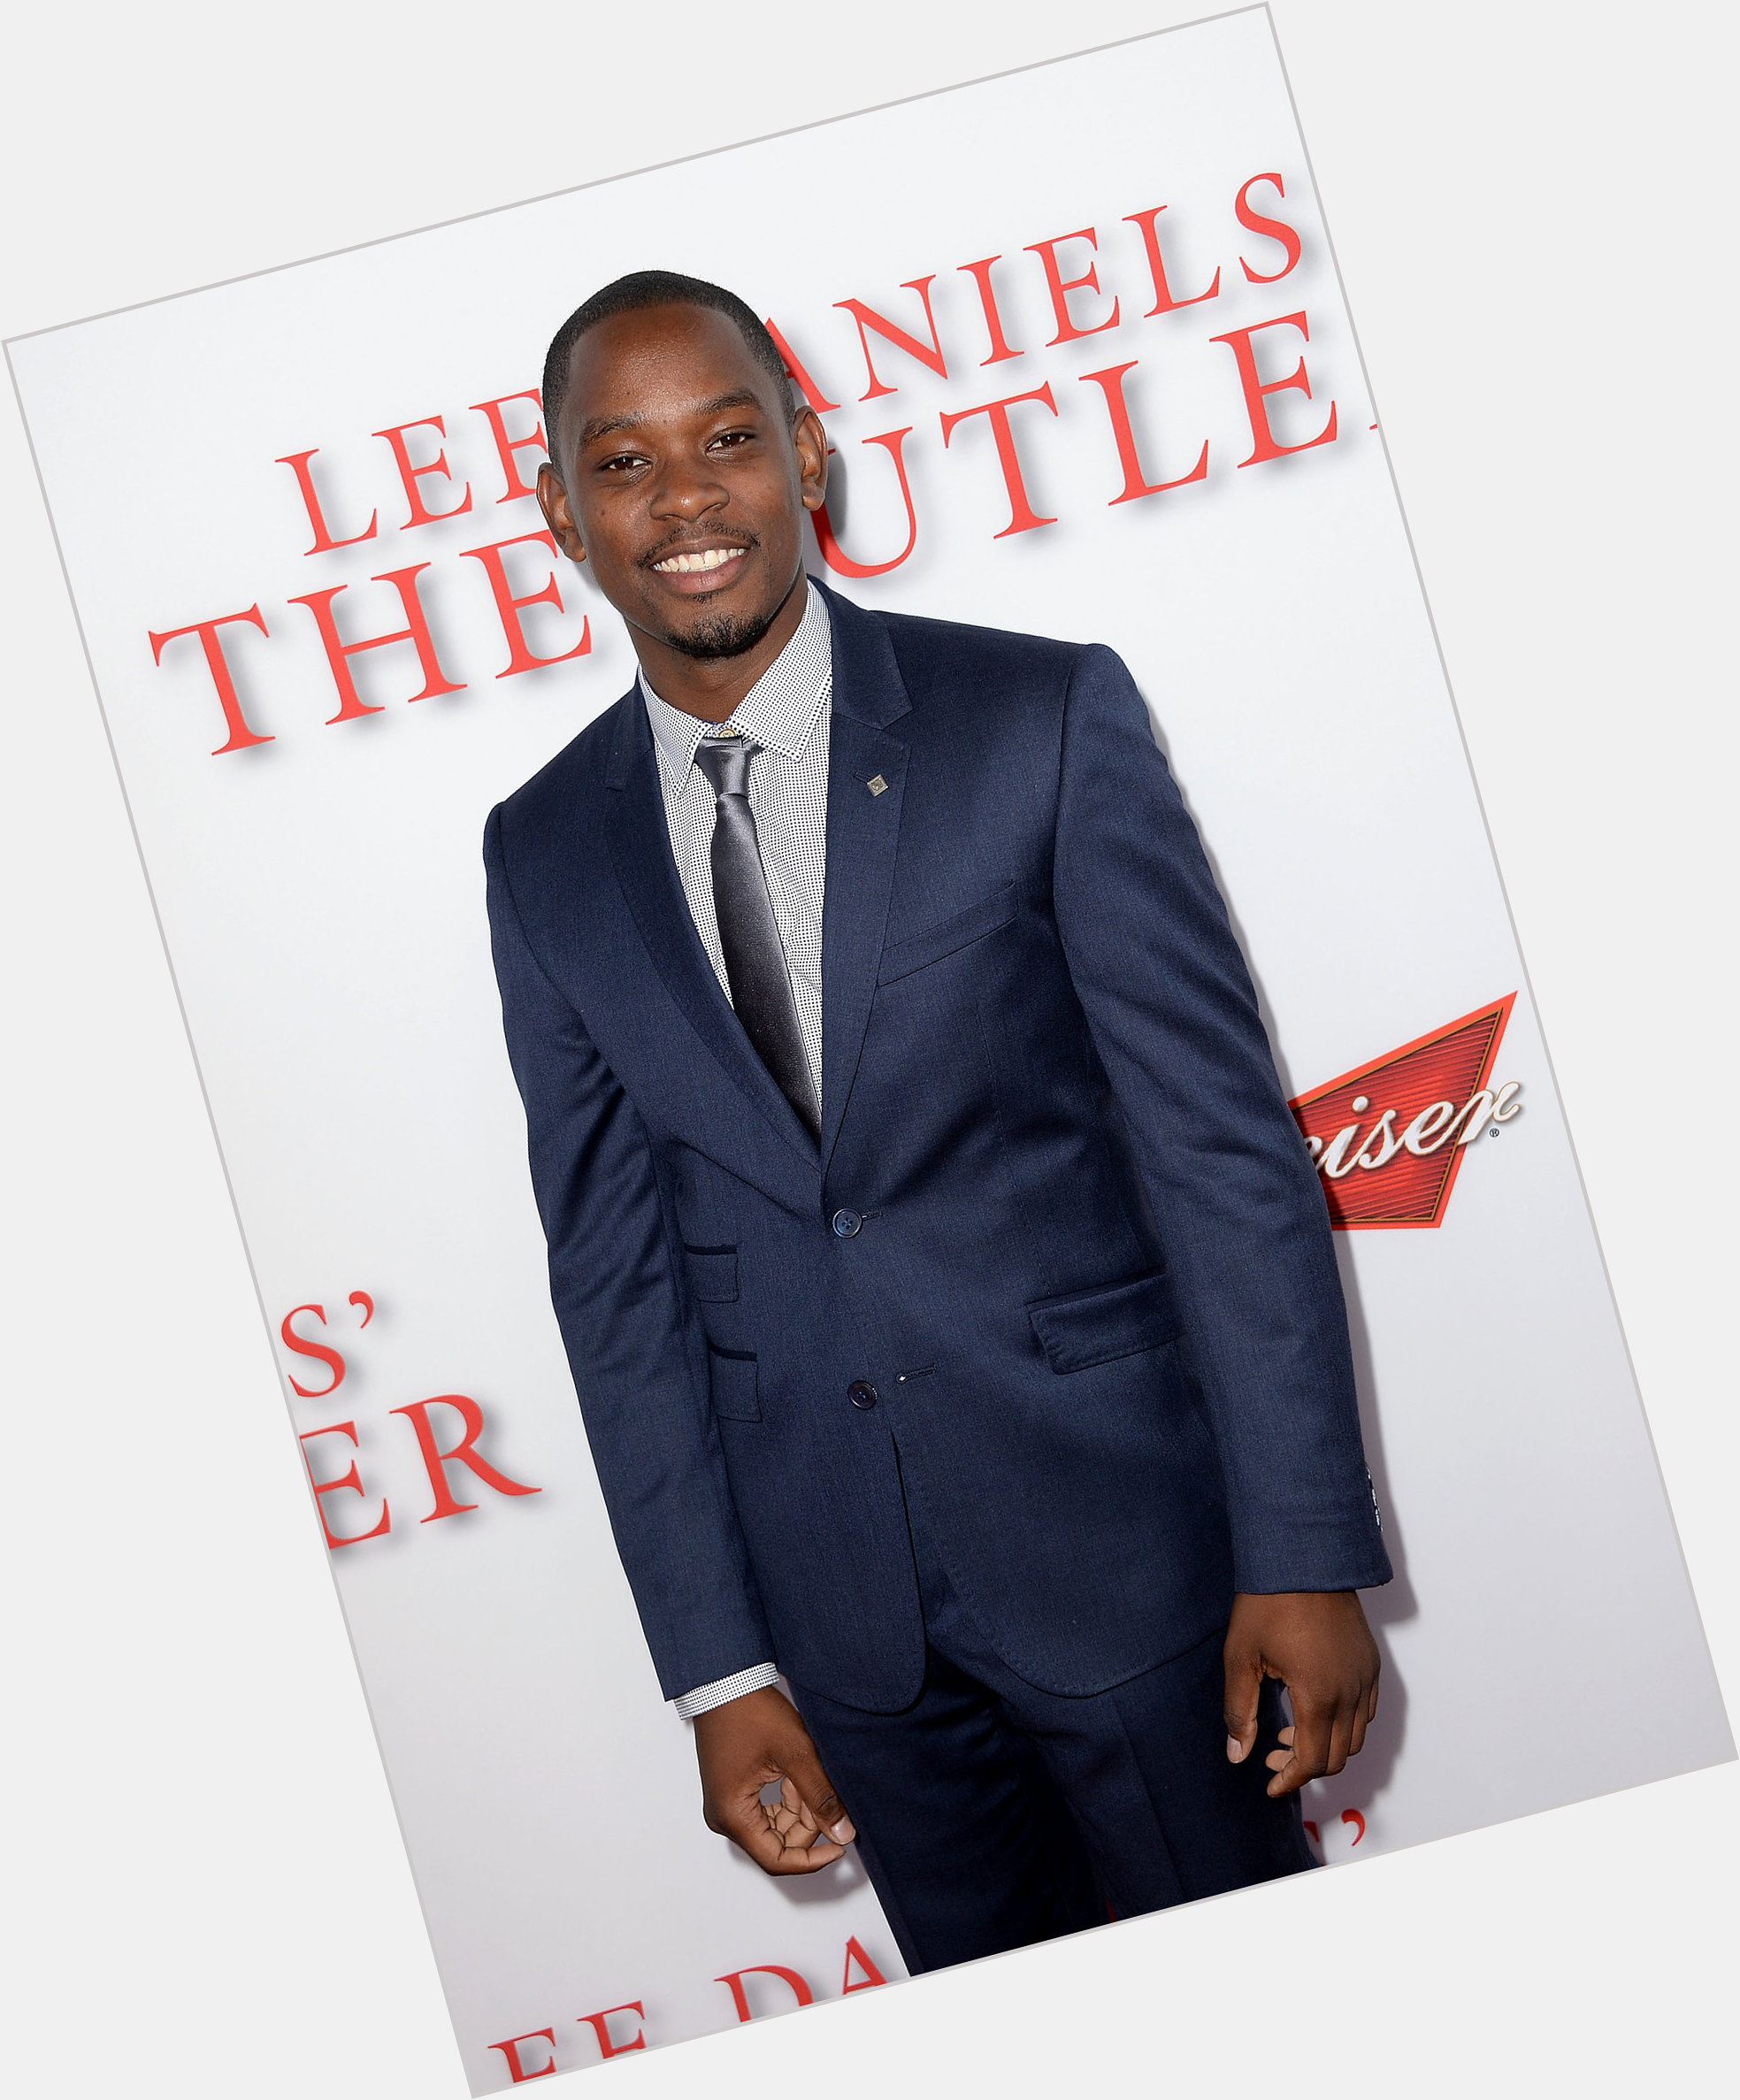 Aml Ameen dating 2